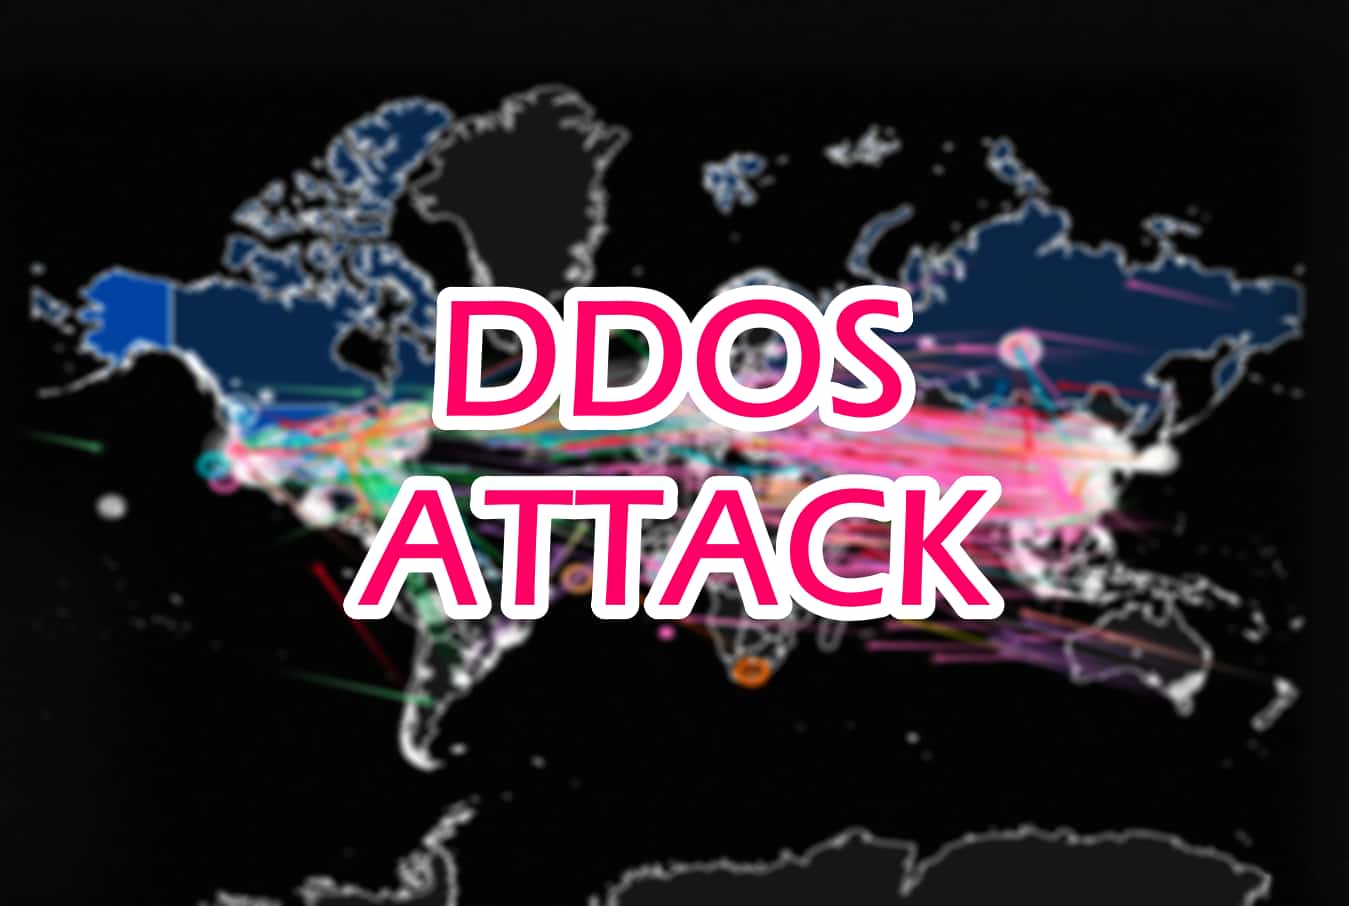 Microsoft Azure customer Targeted with 2.4 Tbps DDoS Attack